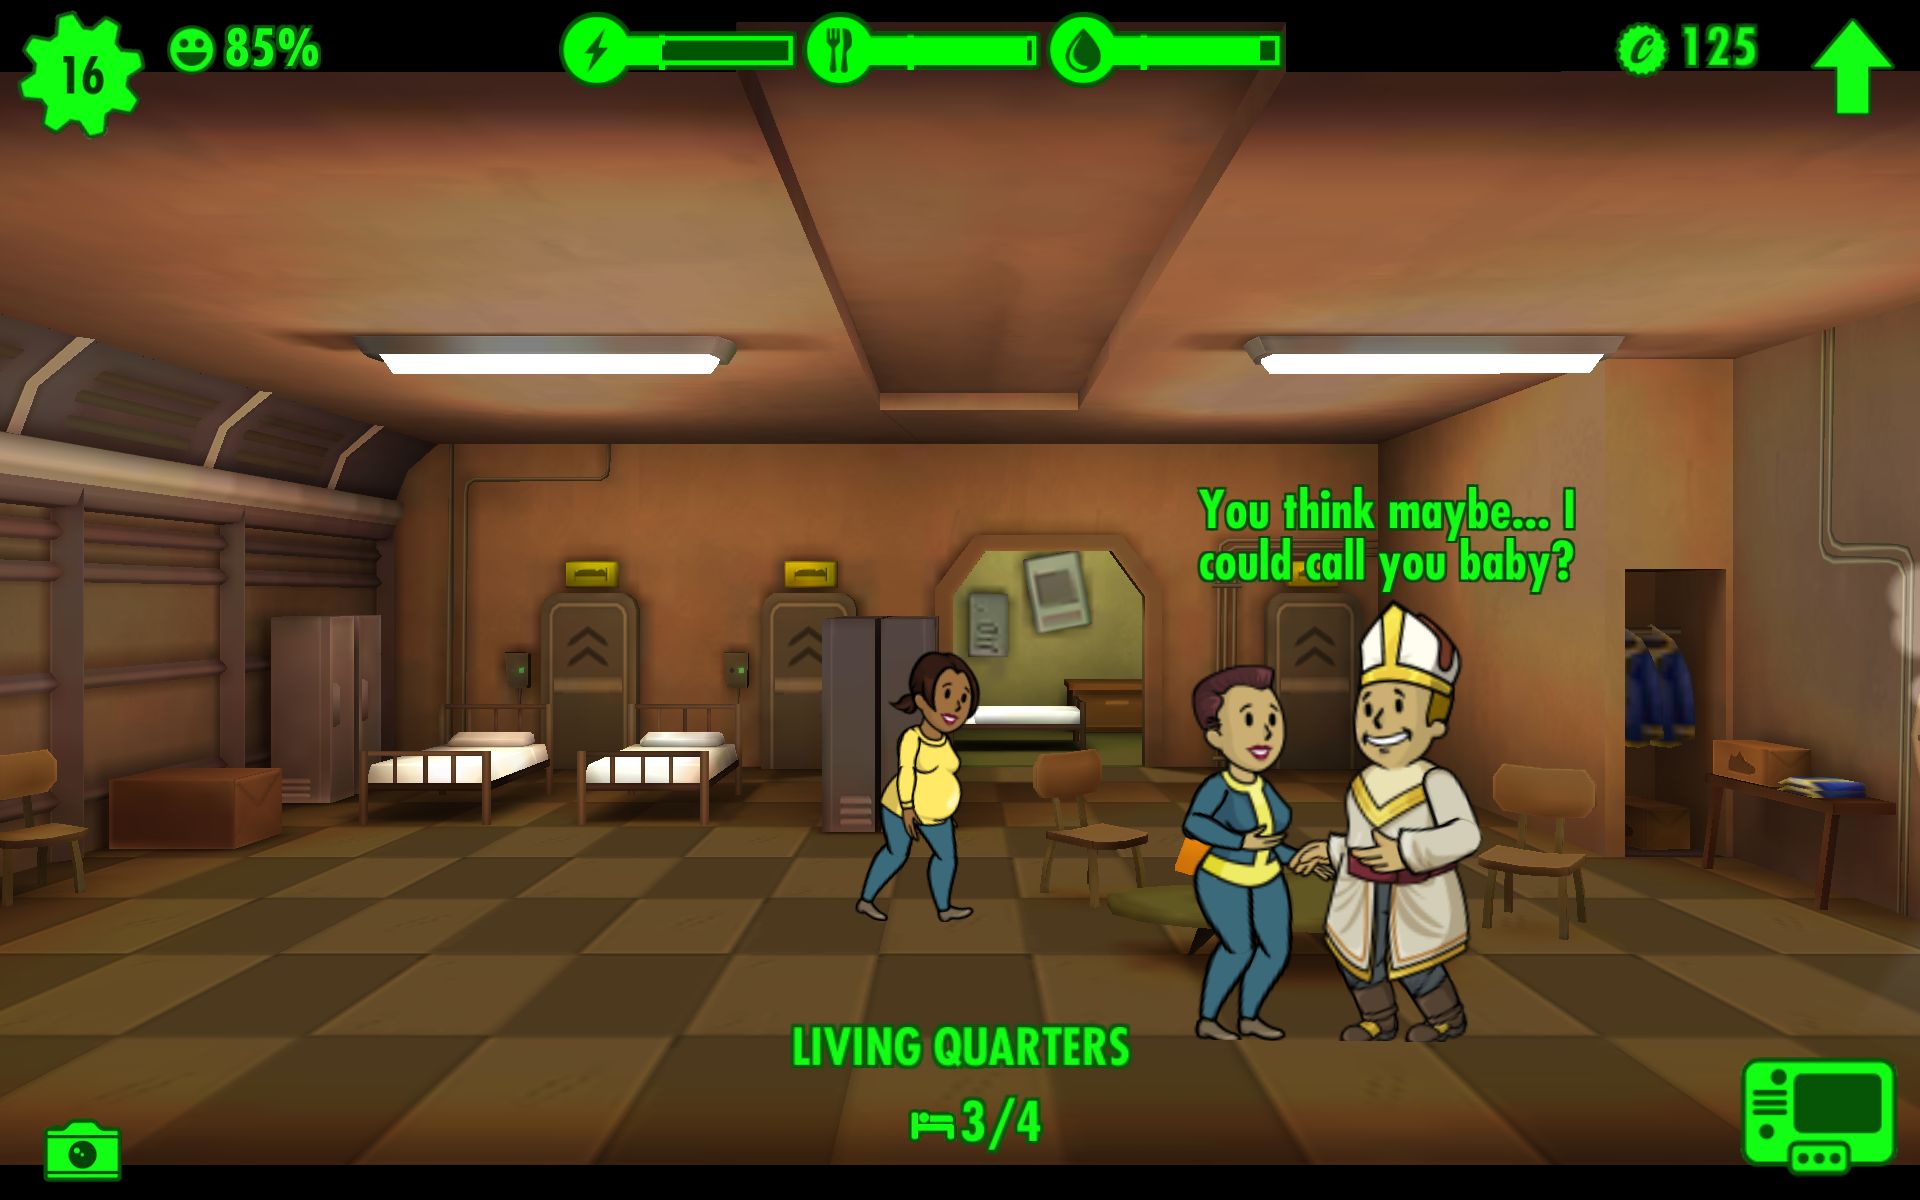 do bigger training rooms train dwellers faster in fallout shelter